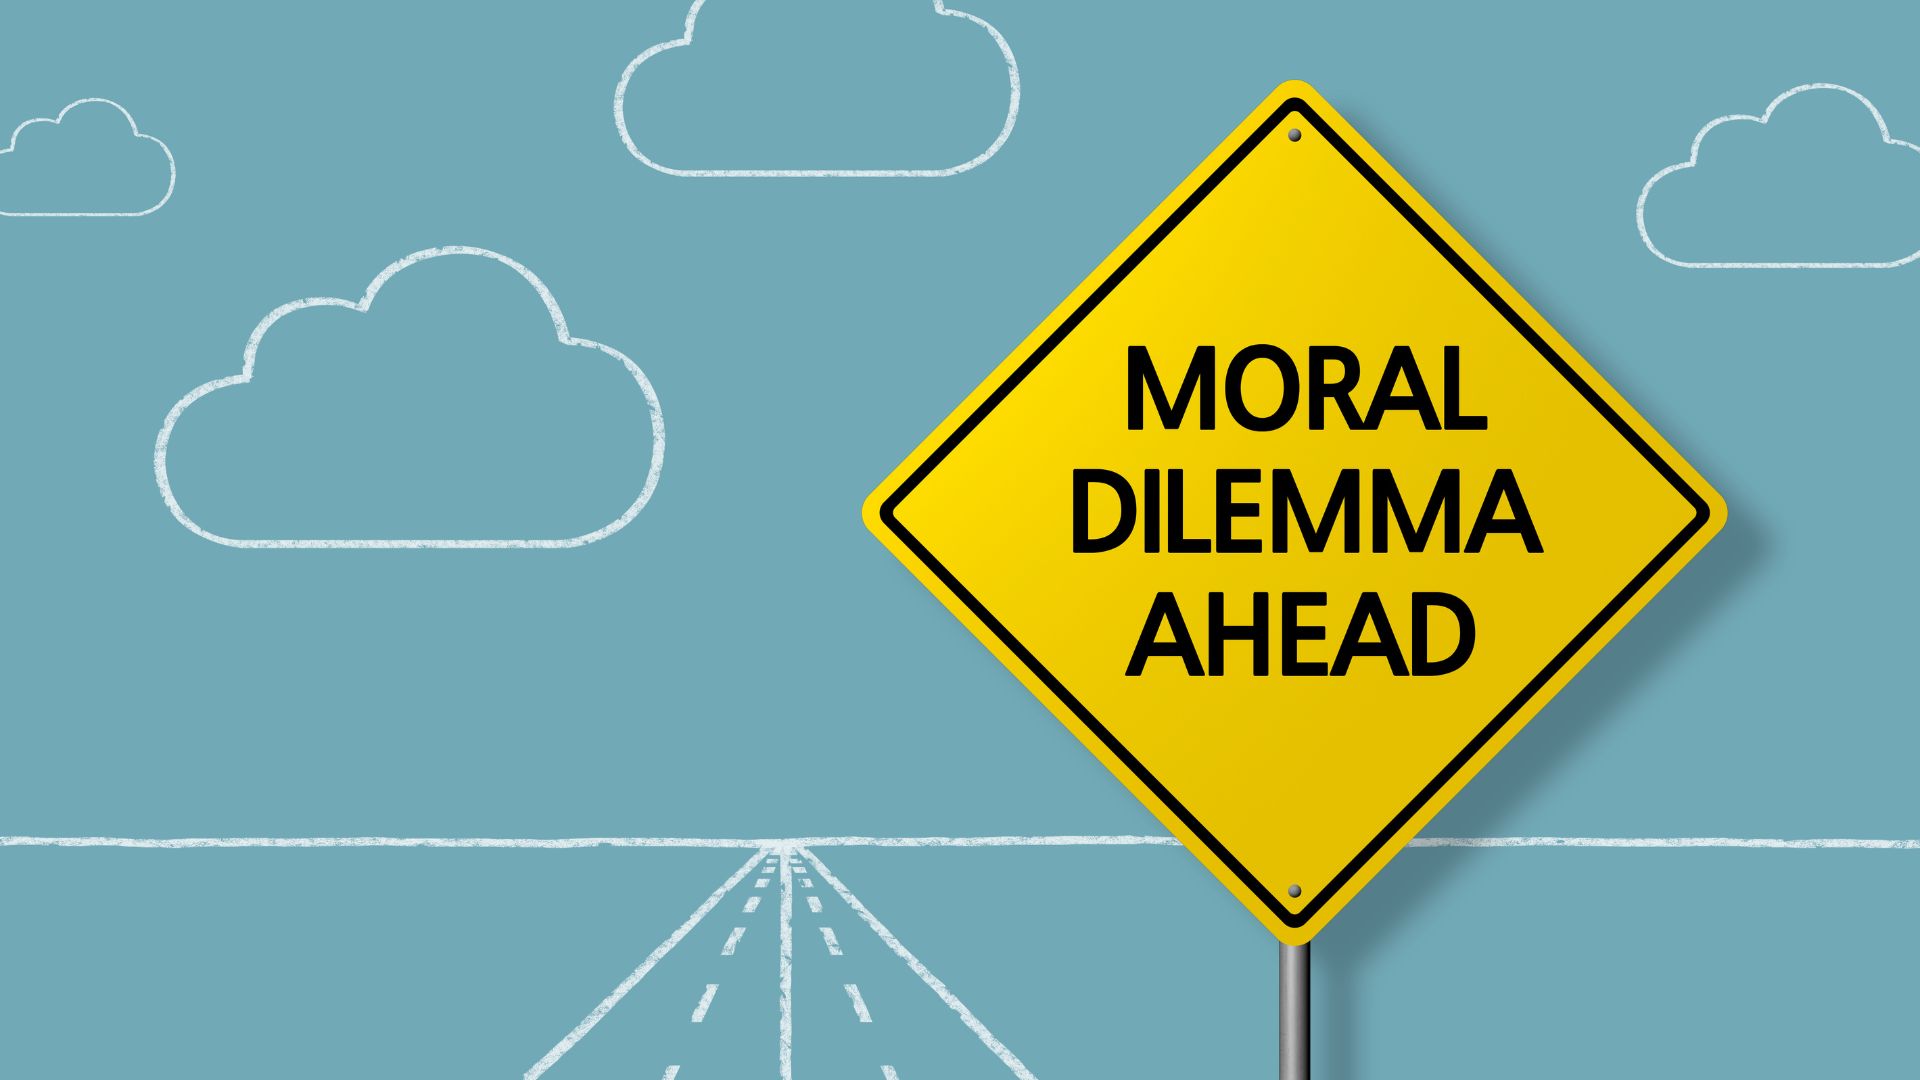 Moral dilemma sign, what does it mean to hold someone accountable